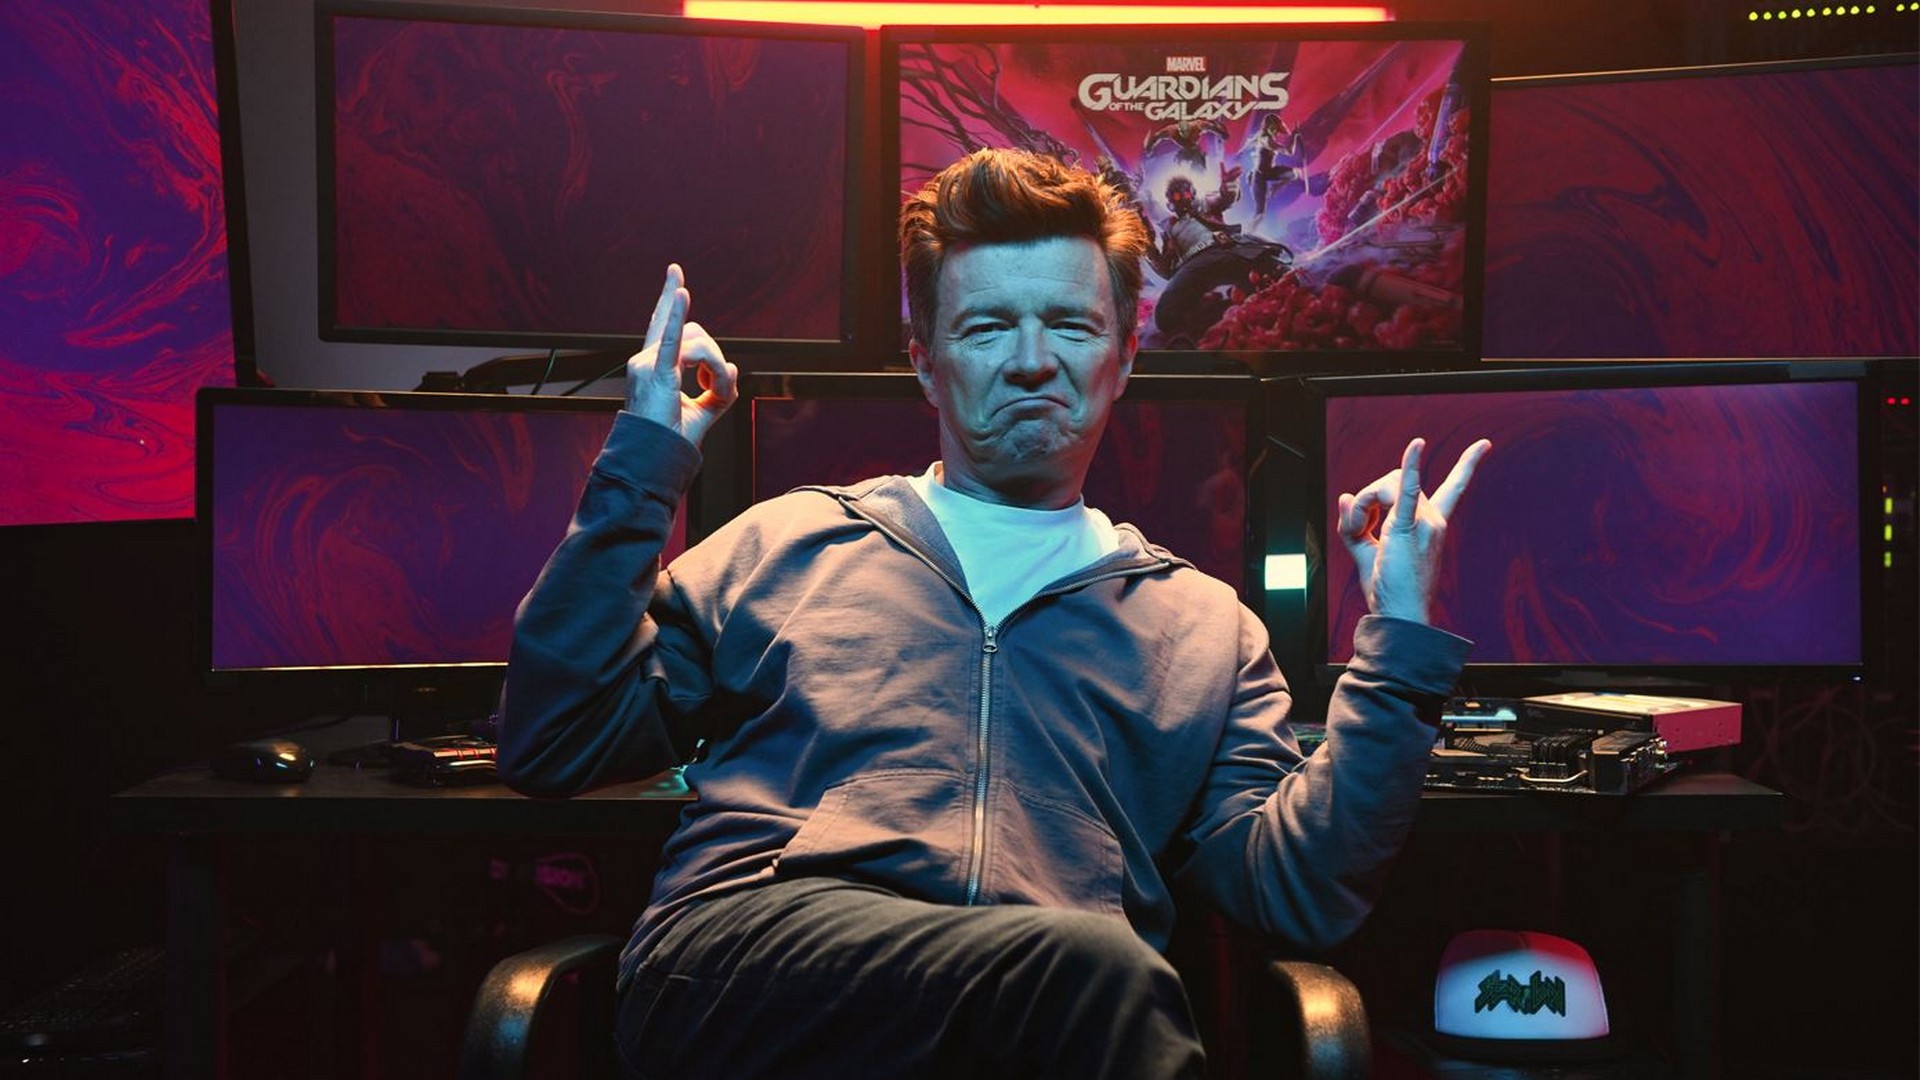 Rick Astley Reclaims The “RICKROLL” For Marvel’s Guardians Of The Galaxy